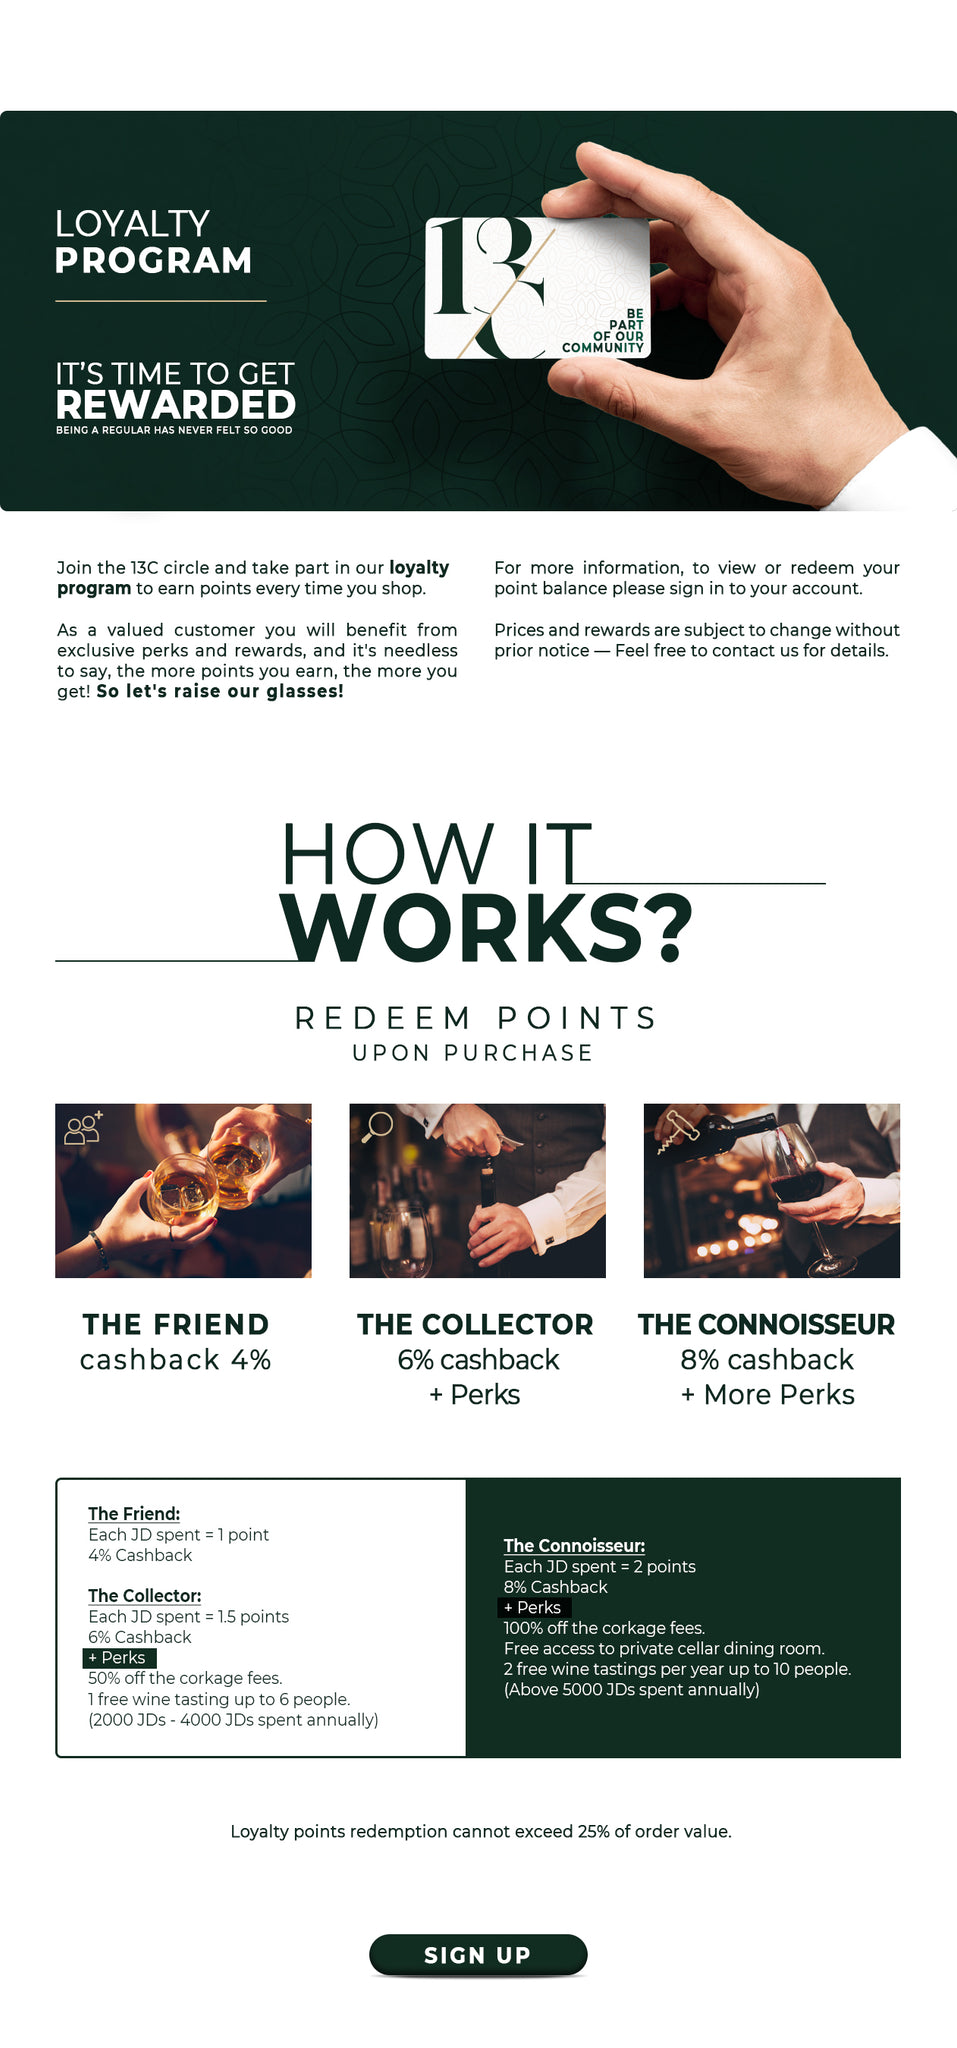 Loyalty program points and perks explained